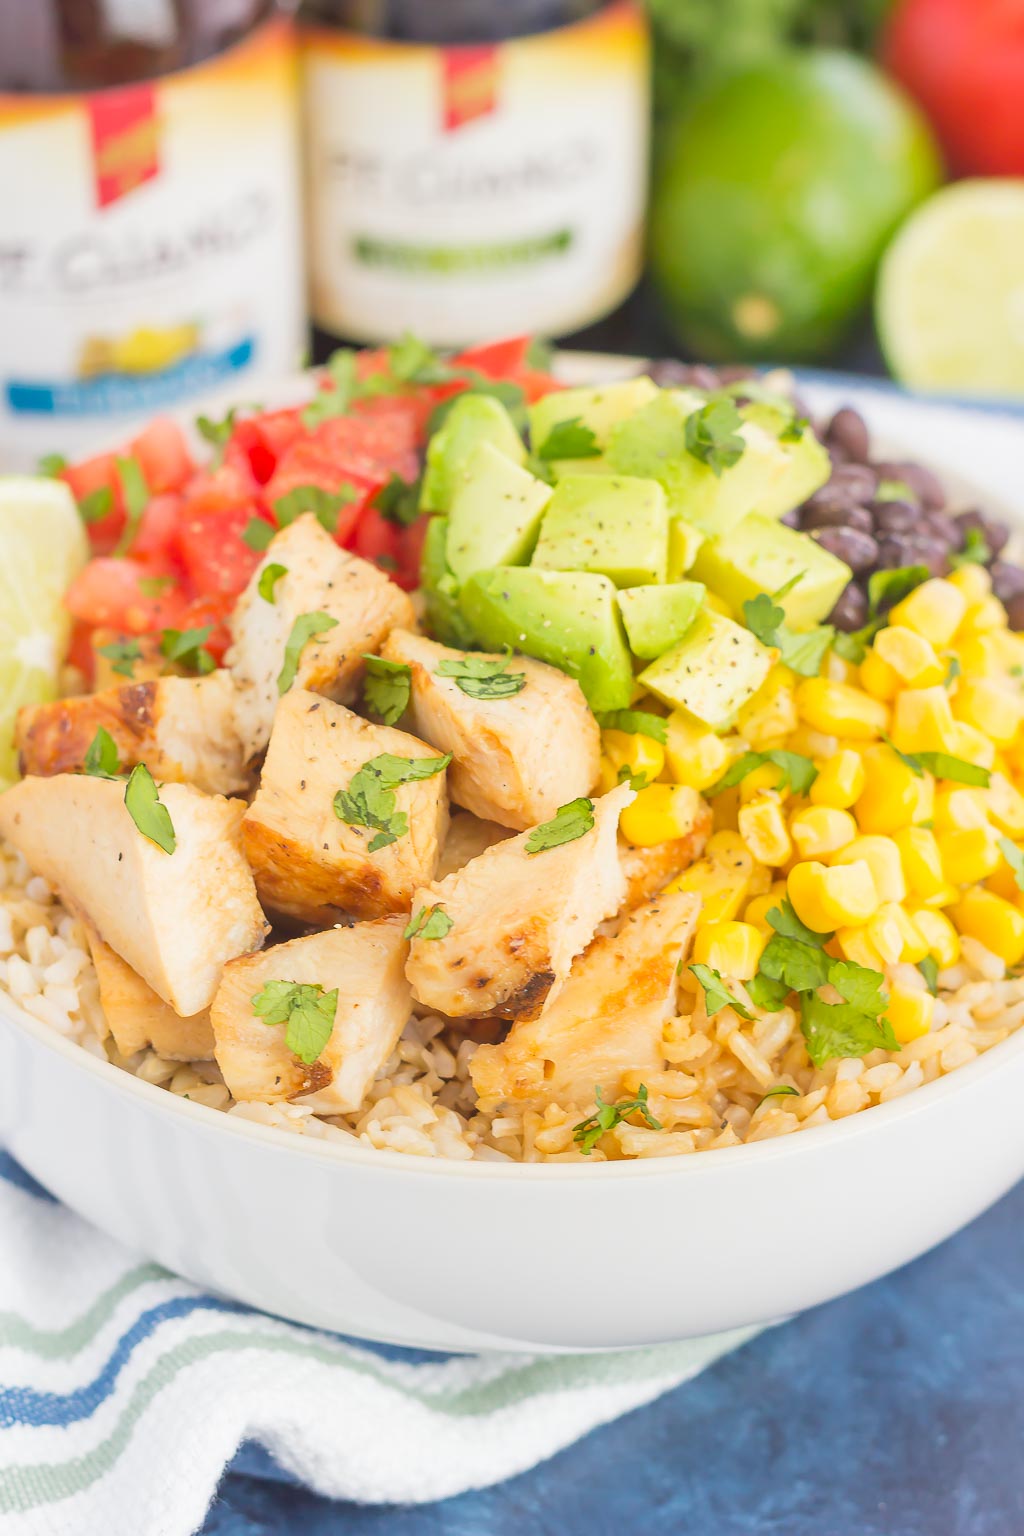 Skip the takeout and make your own Easy Chicken Burrito Bowl at home! It's loaded with juicy chicken, cilantro lime rice, black beans, corn, fresh tomatoes, and avocado. Drizzled with a soy sauce marinade and ready in no time, this meal is sure to become a family favorite!